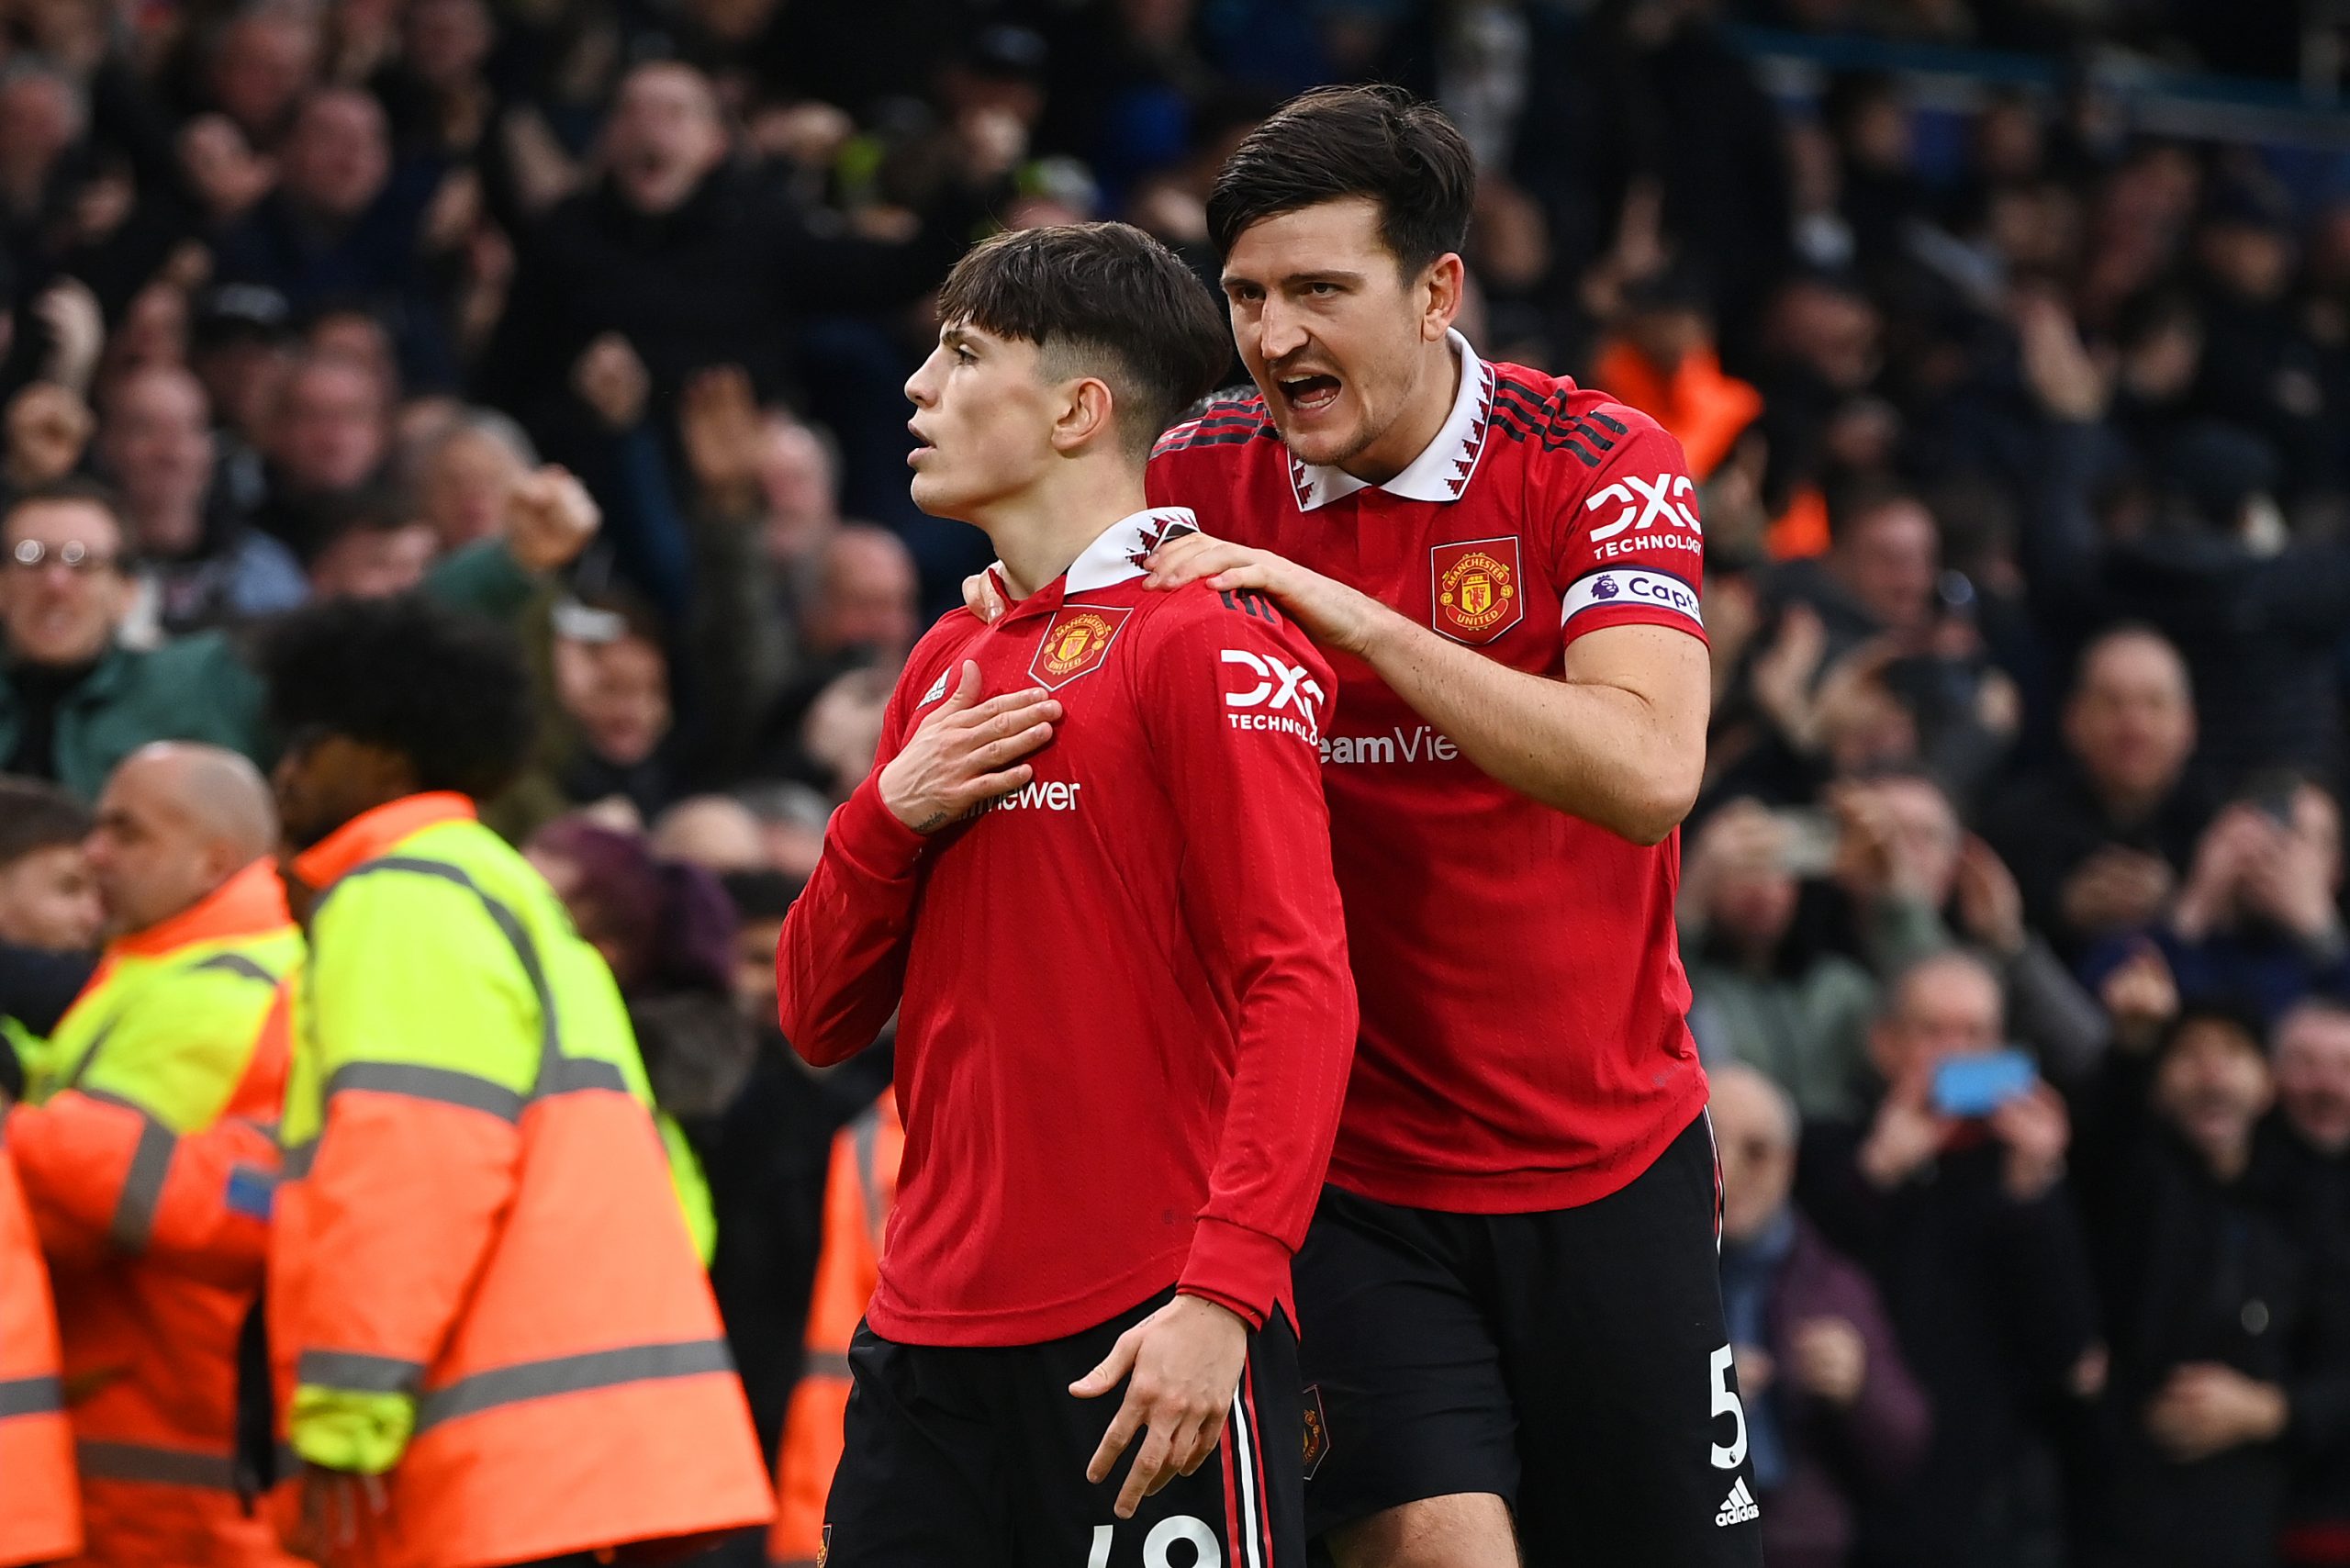 Harry Maguire tips Manchester United youngster Alejandro Garnacho to have "big future" after FA Cup win.